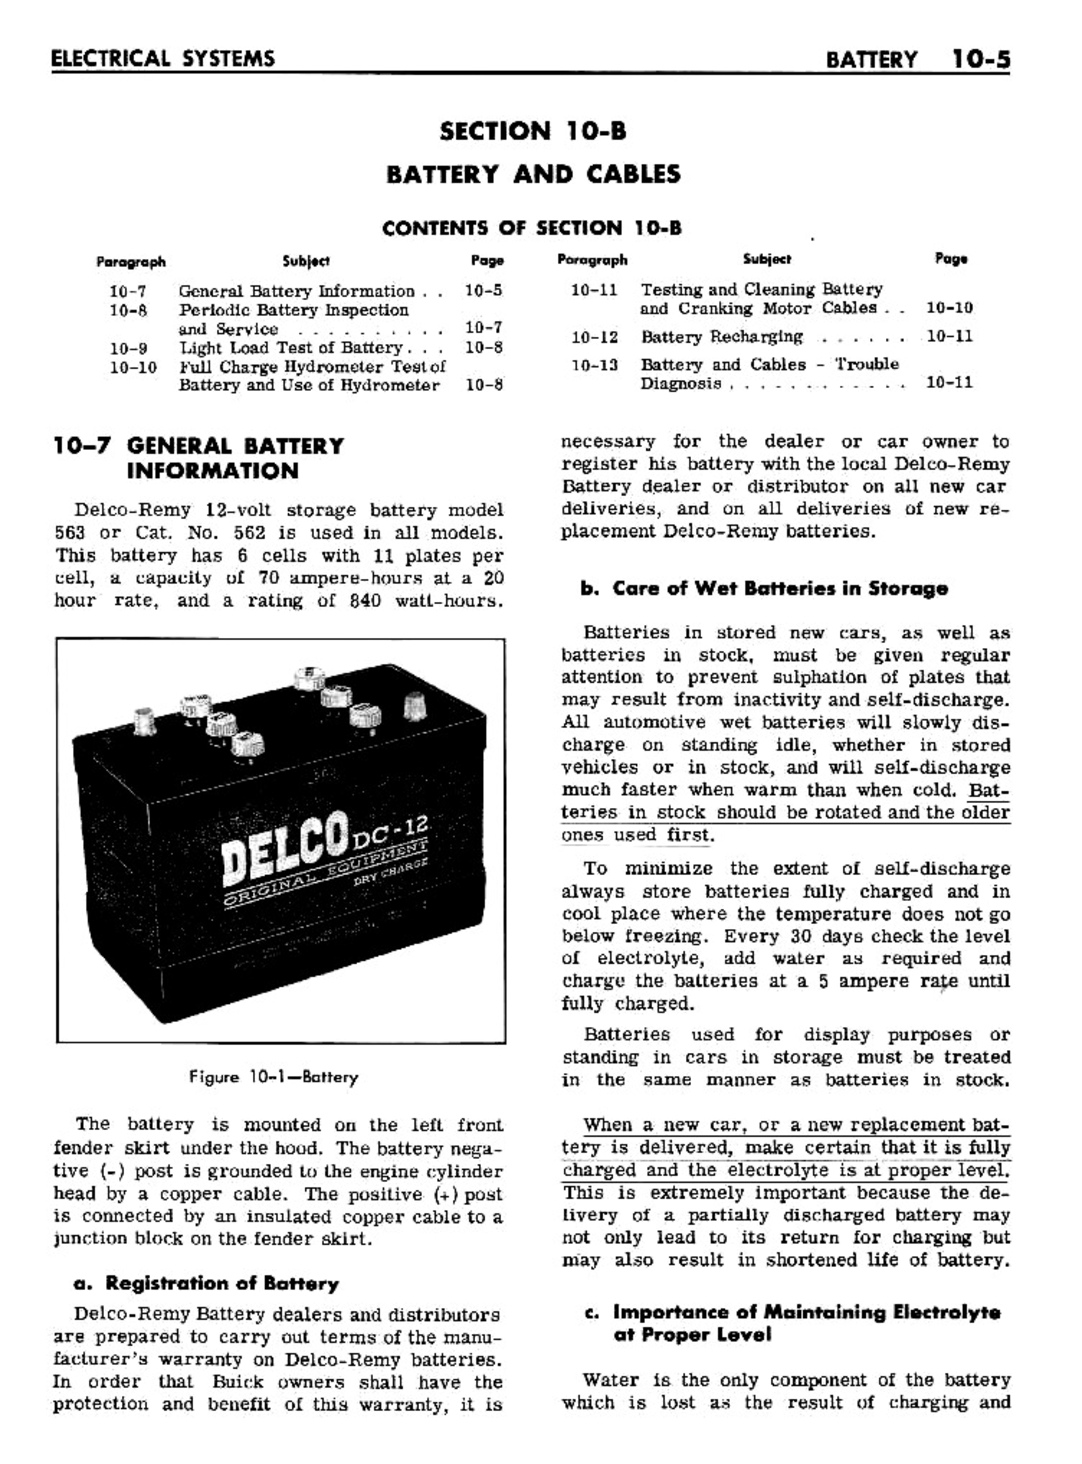 n_10 1961 Buick Shop Manual - Electrical Systems-005-005.jpg